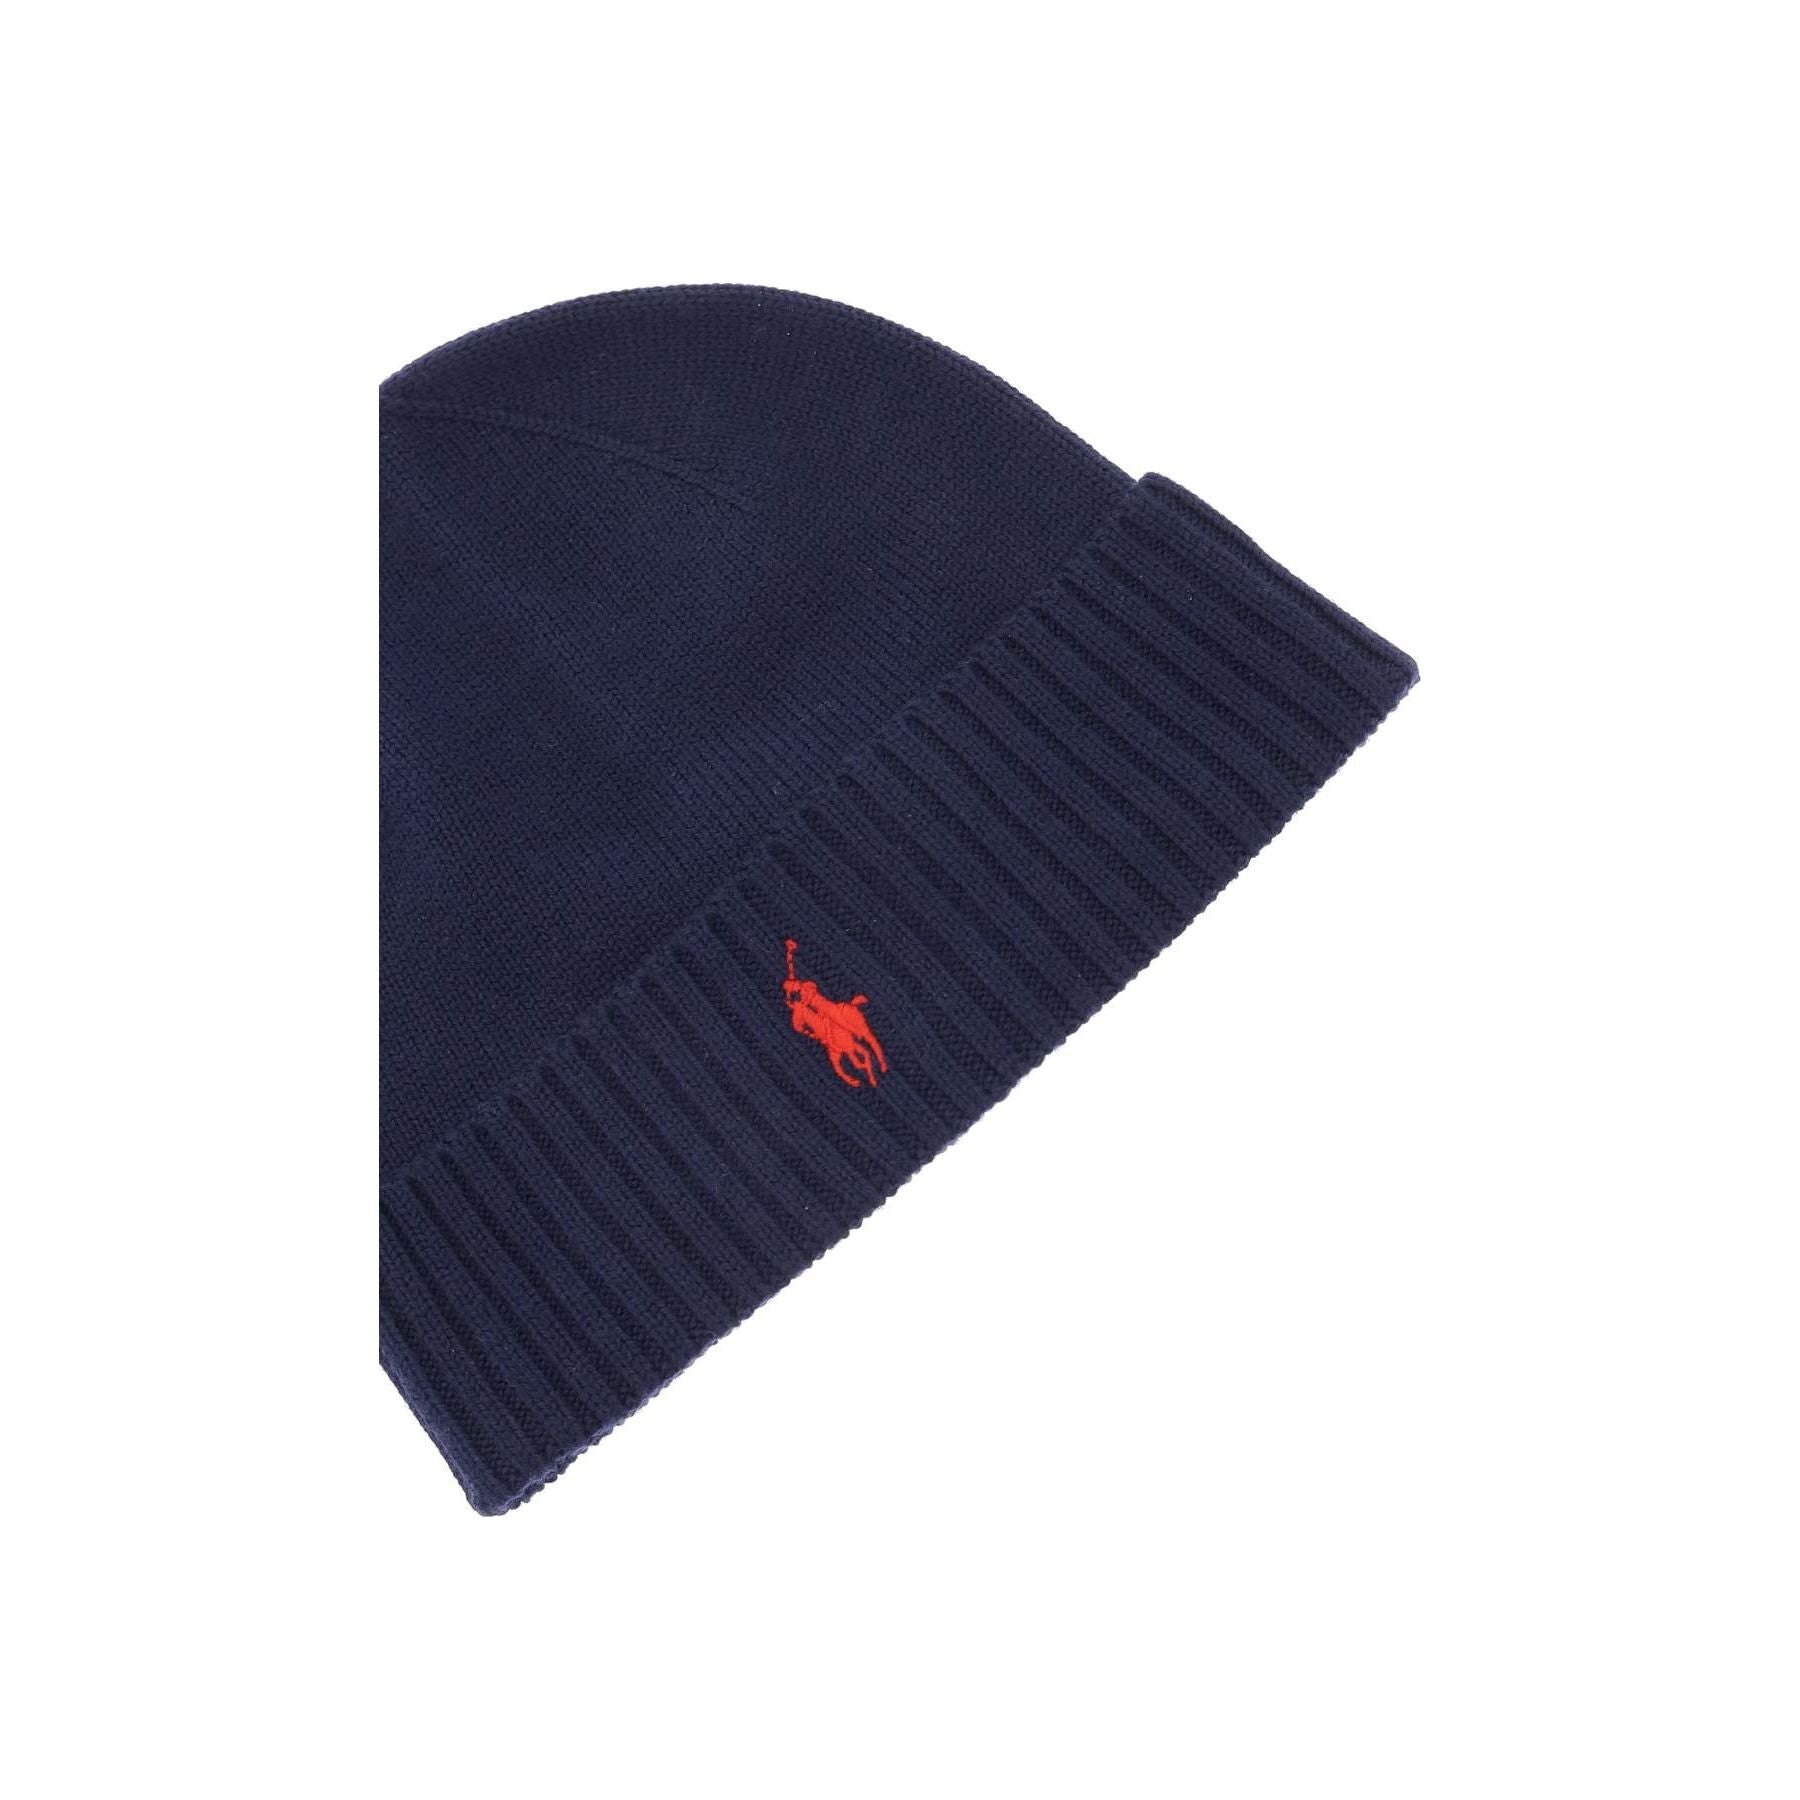 Pony Embroidered Cozy Wool Knit Beanie